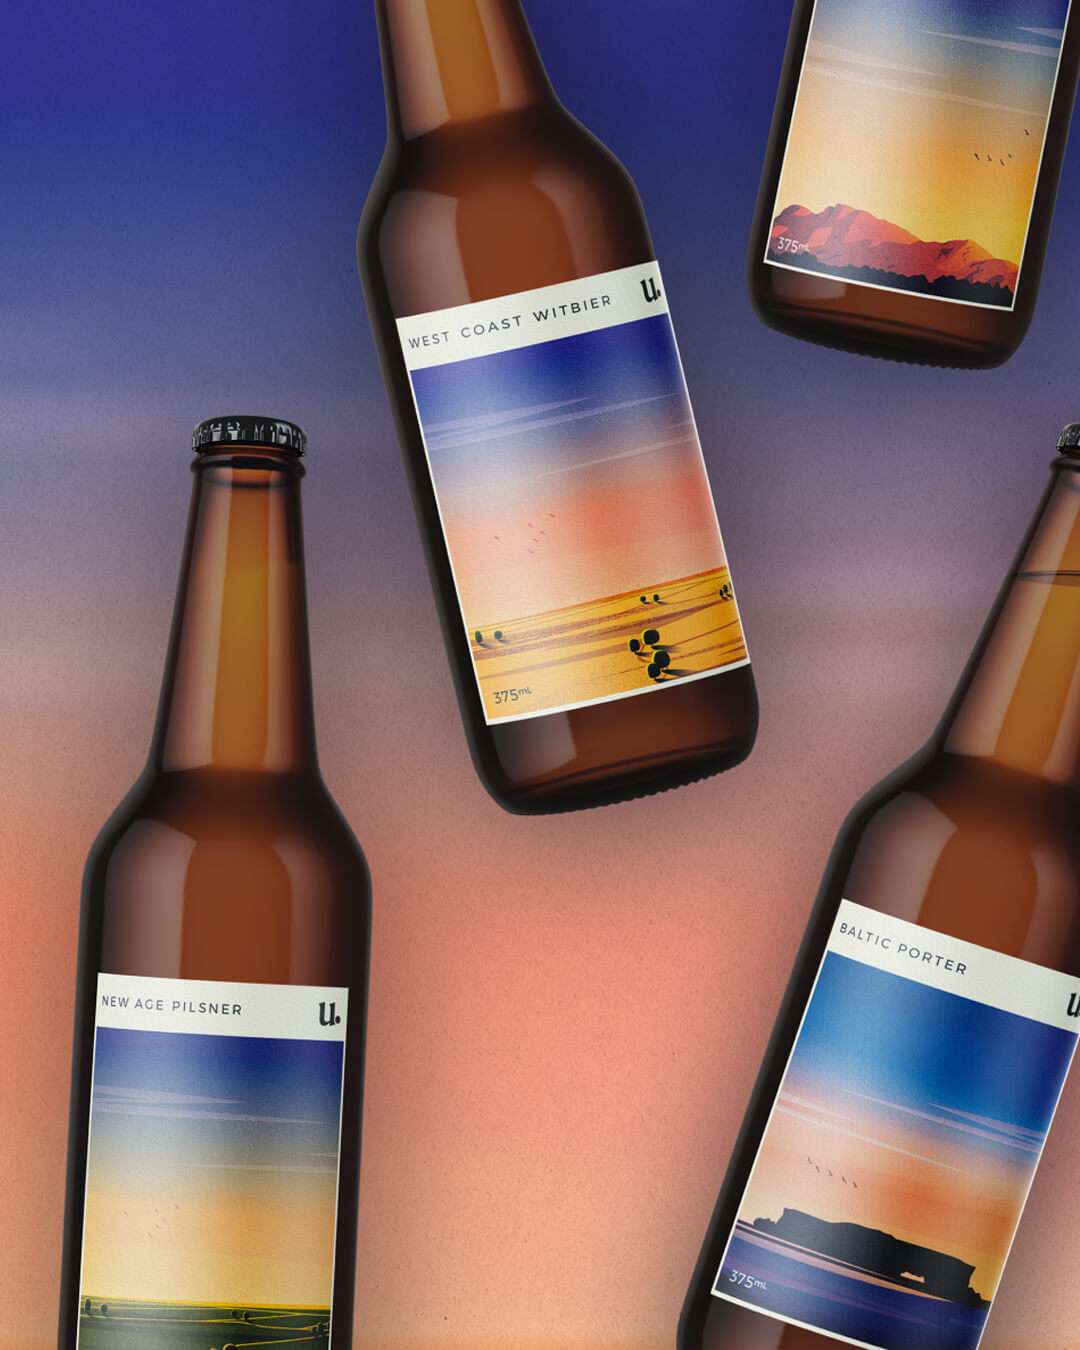 Floating beer bottles displaying logo, branding, and packaging & label design for a Western Australian brewery.